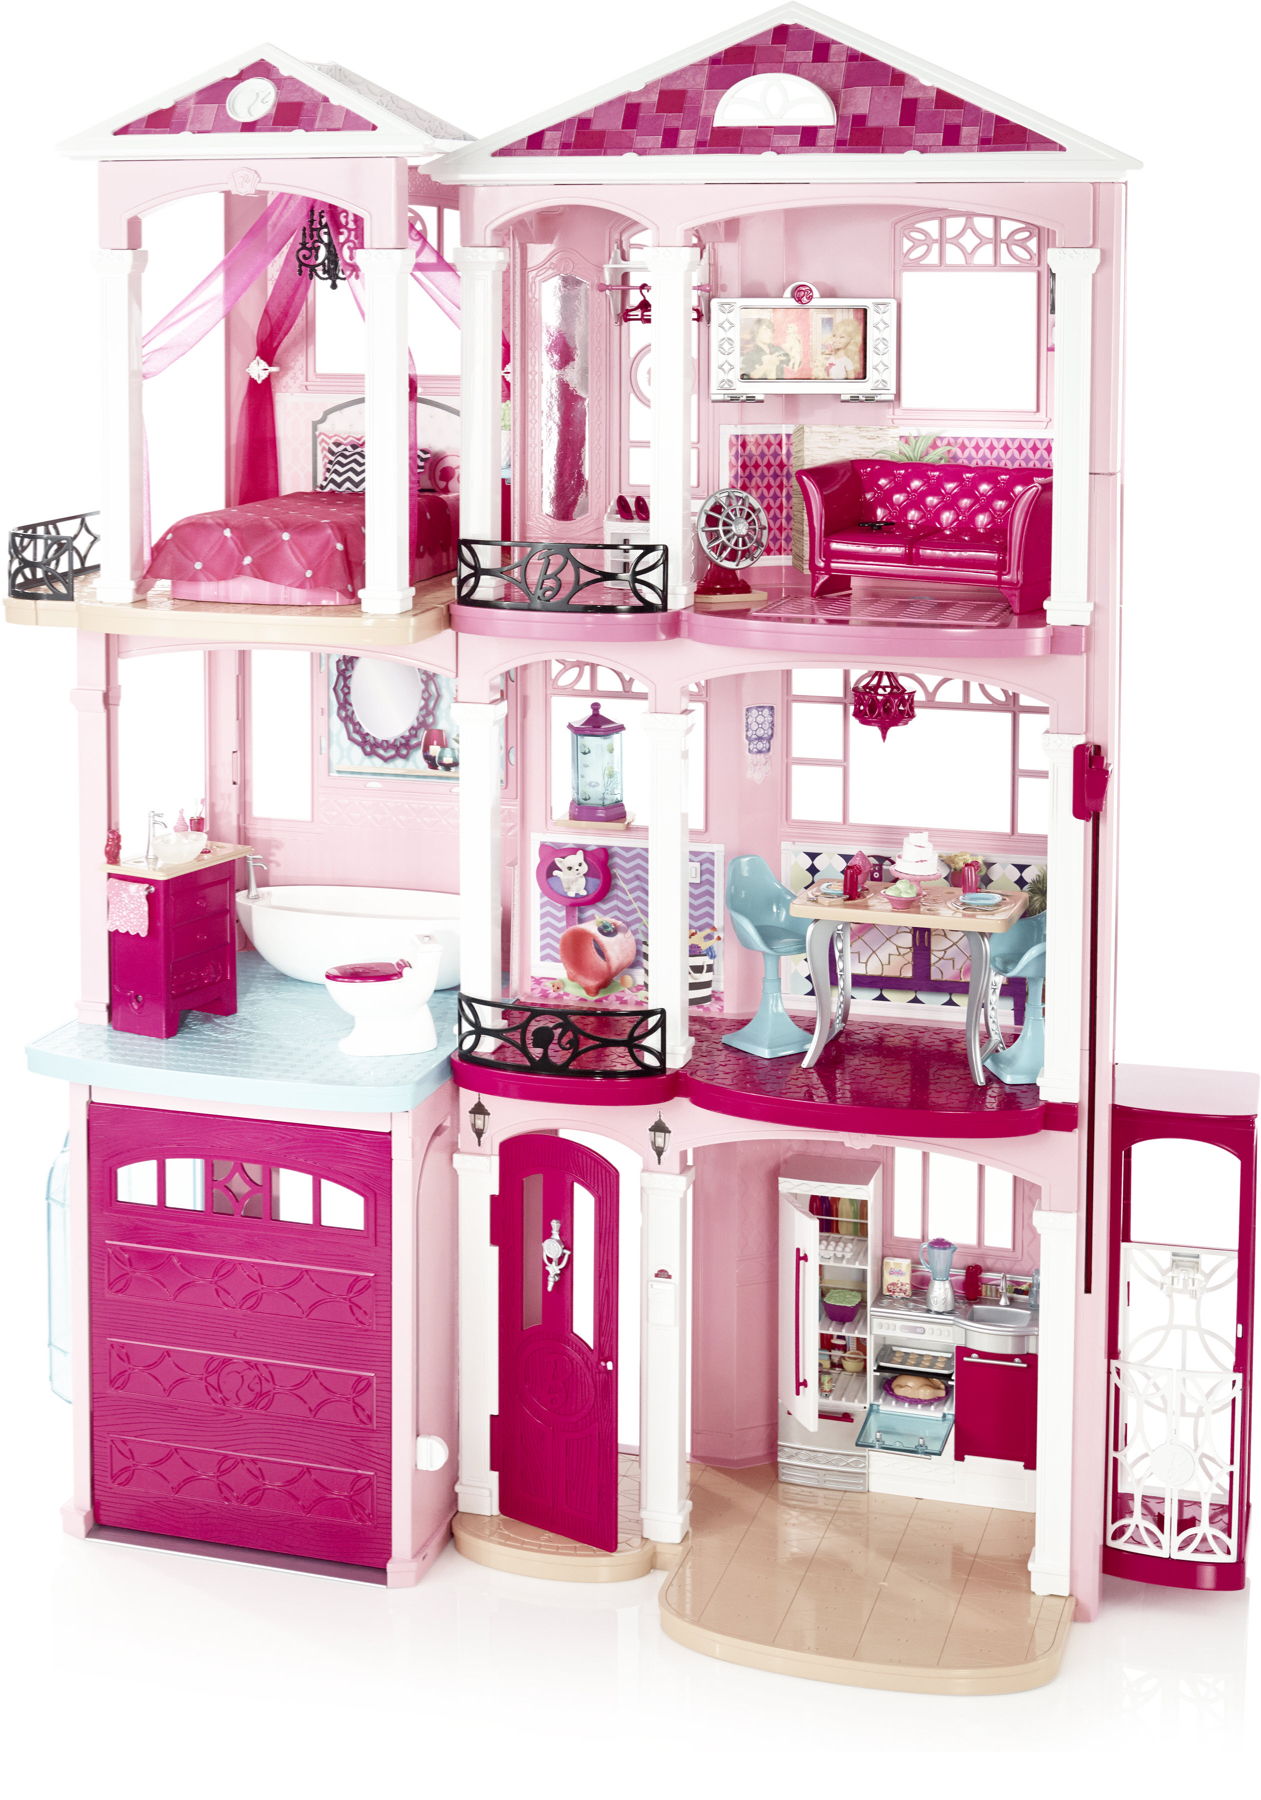 2018 Barbie Dream House with slide and garage!